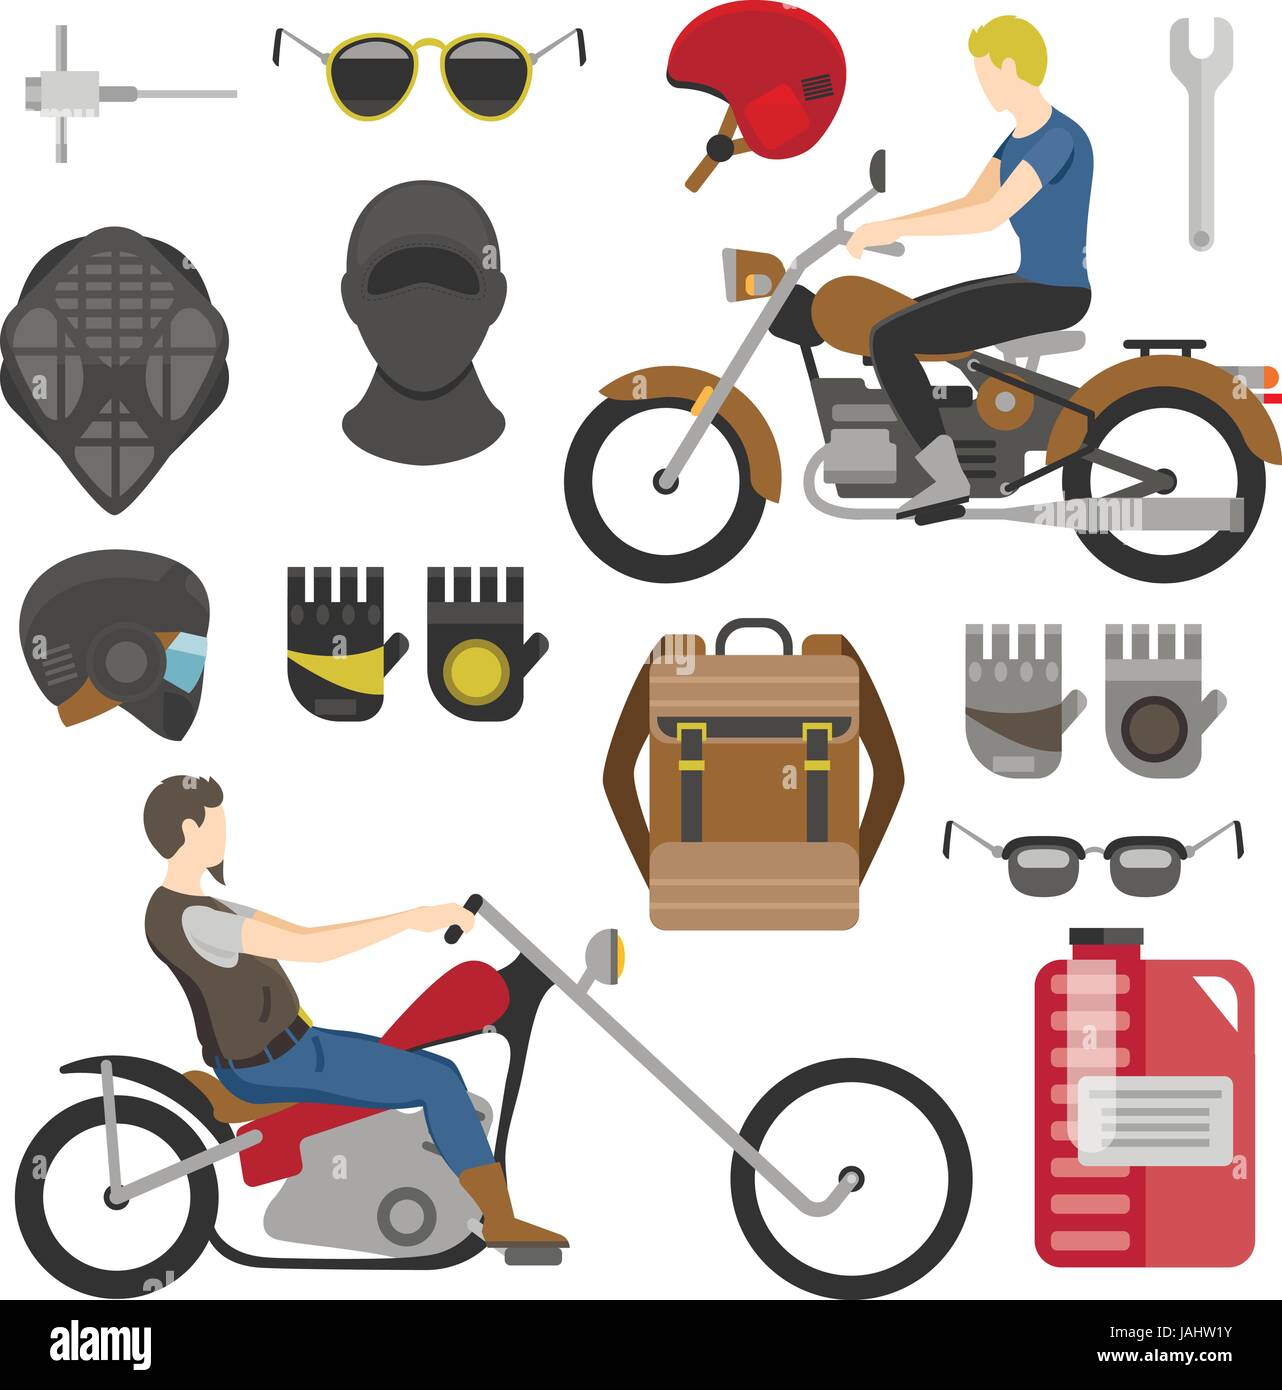 Two motorcyclist with accessories set. helmets, backpack and motor oil. tools, sunglasses, mask and gloves. Stock Vector